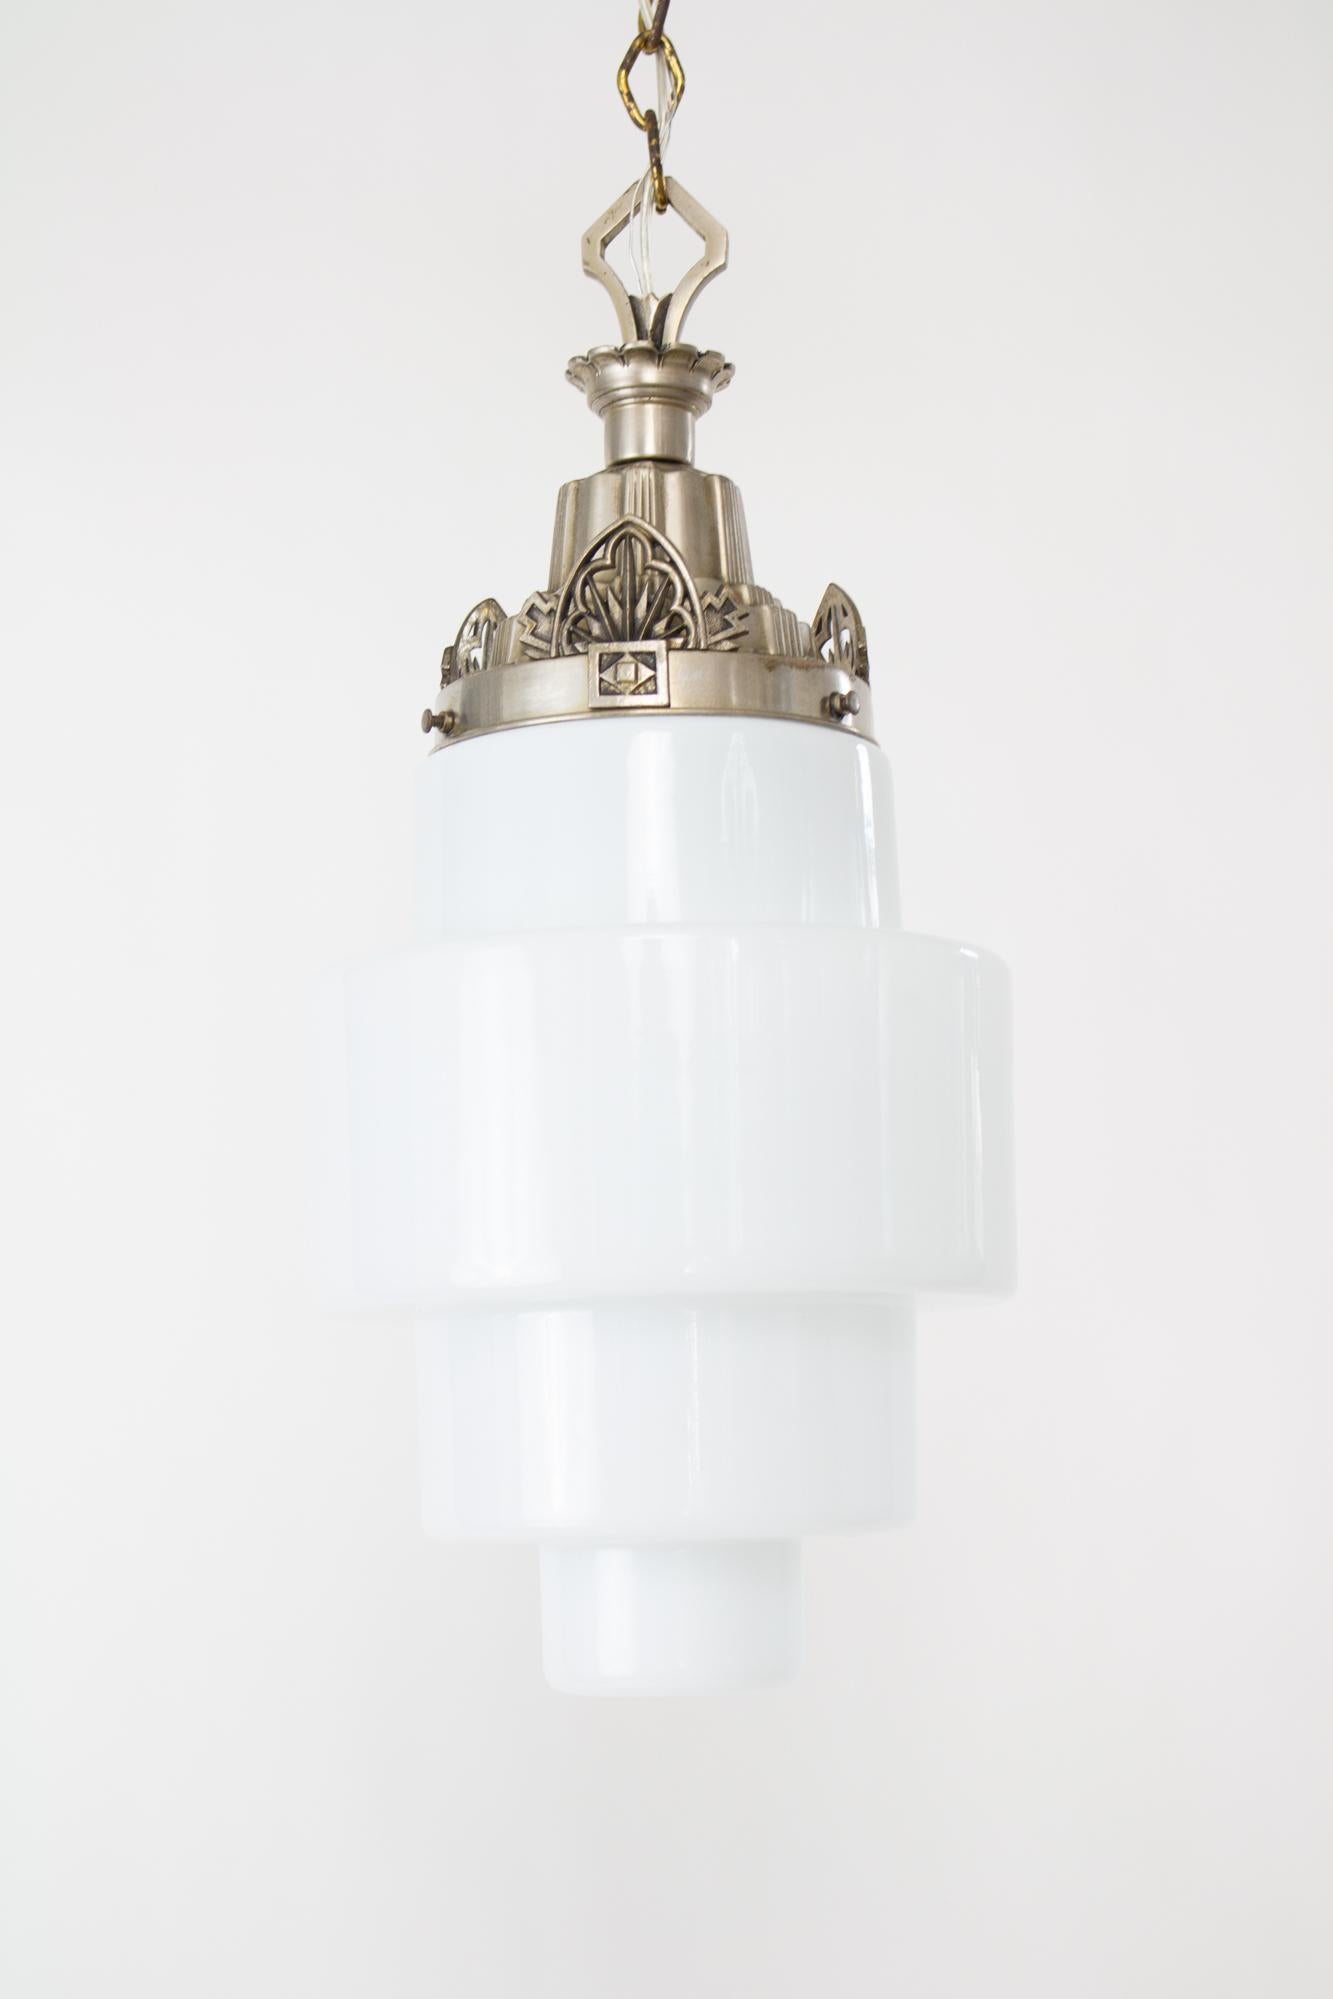 Art Deco milk glass pendant with a nickel plated cast metal fixture. The fixture has a long top loop and crown shaped glass holder with a geometric flare design. The canopy is a nickel/brass combination with a classical art deco geometric pattern.